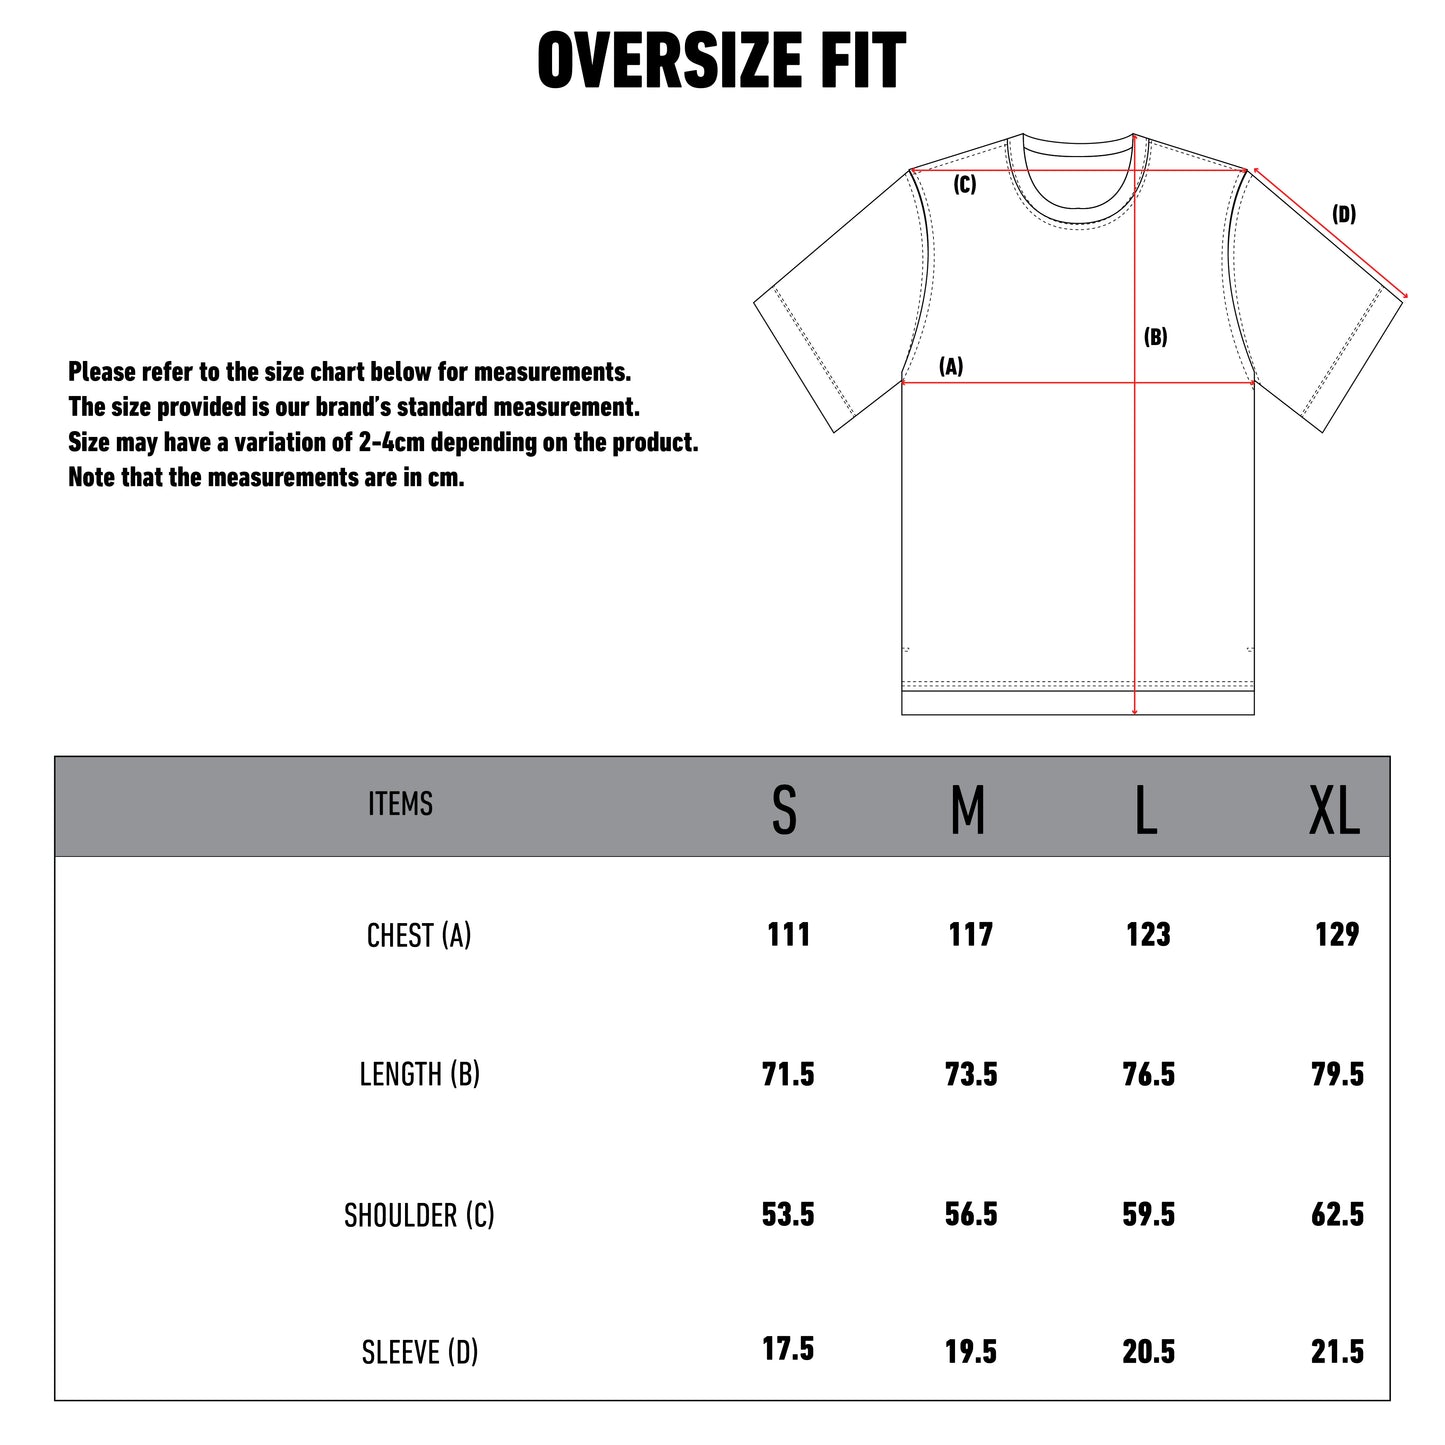 MOSSIMO Energetic Series Oversize T-shirt